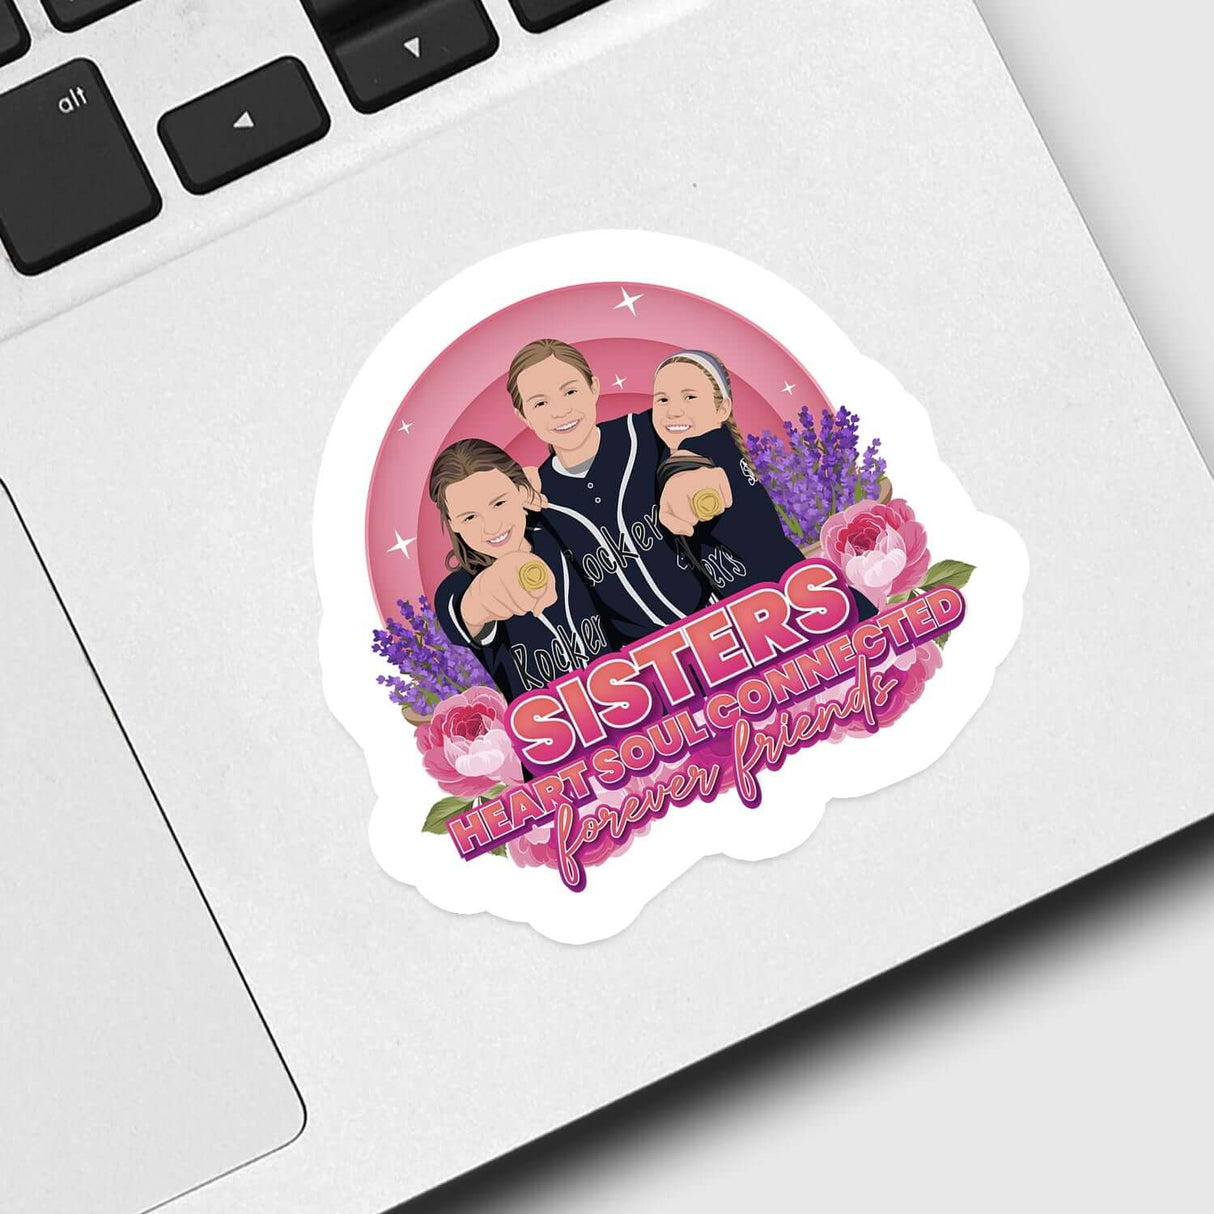 Sister Heart Soul Connects Friends Forever Sticker Personalized